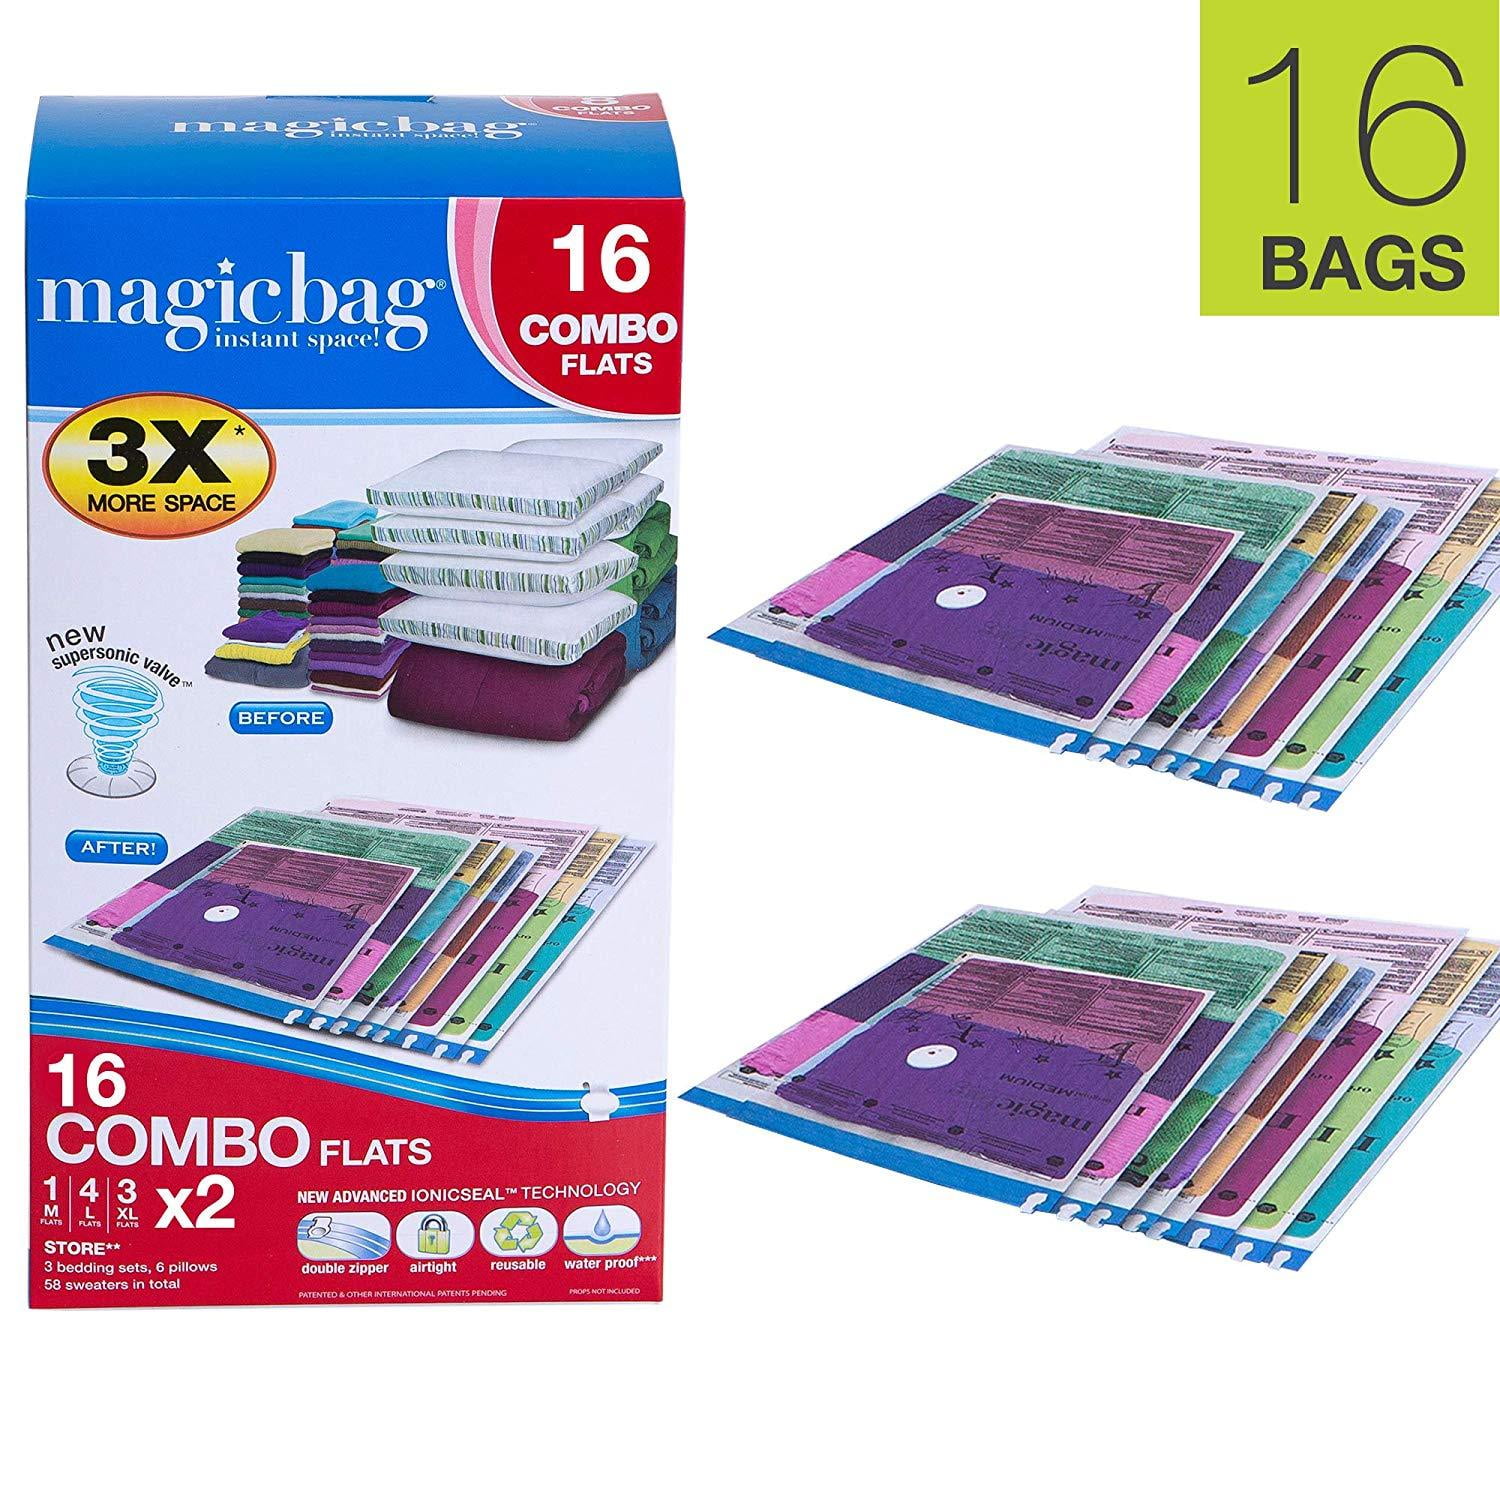 MagicBag Smart Design Instant Space Saver Storage - Combo Size Set - Set of  15 Bags - Airitight Zipper - Vacuum Seal - Clothing, Bedroom Sets- Home  Organization